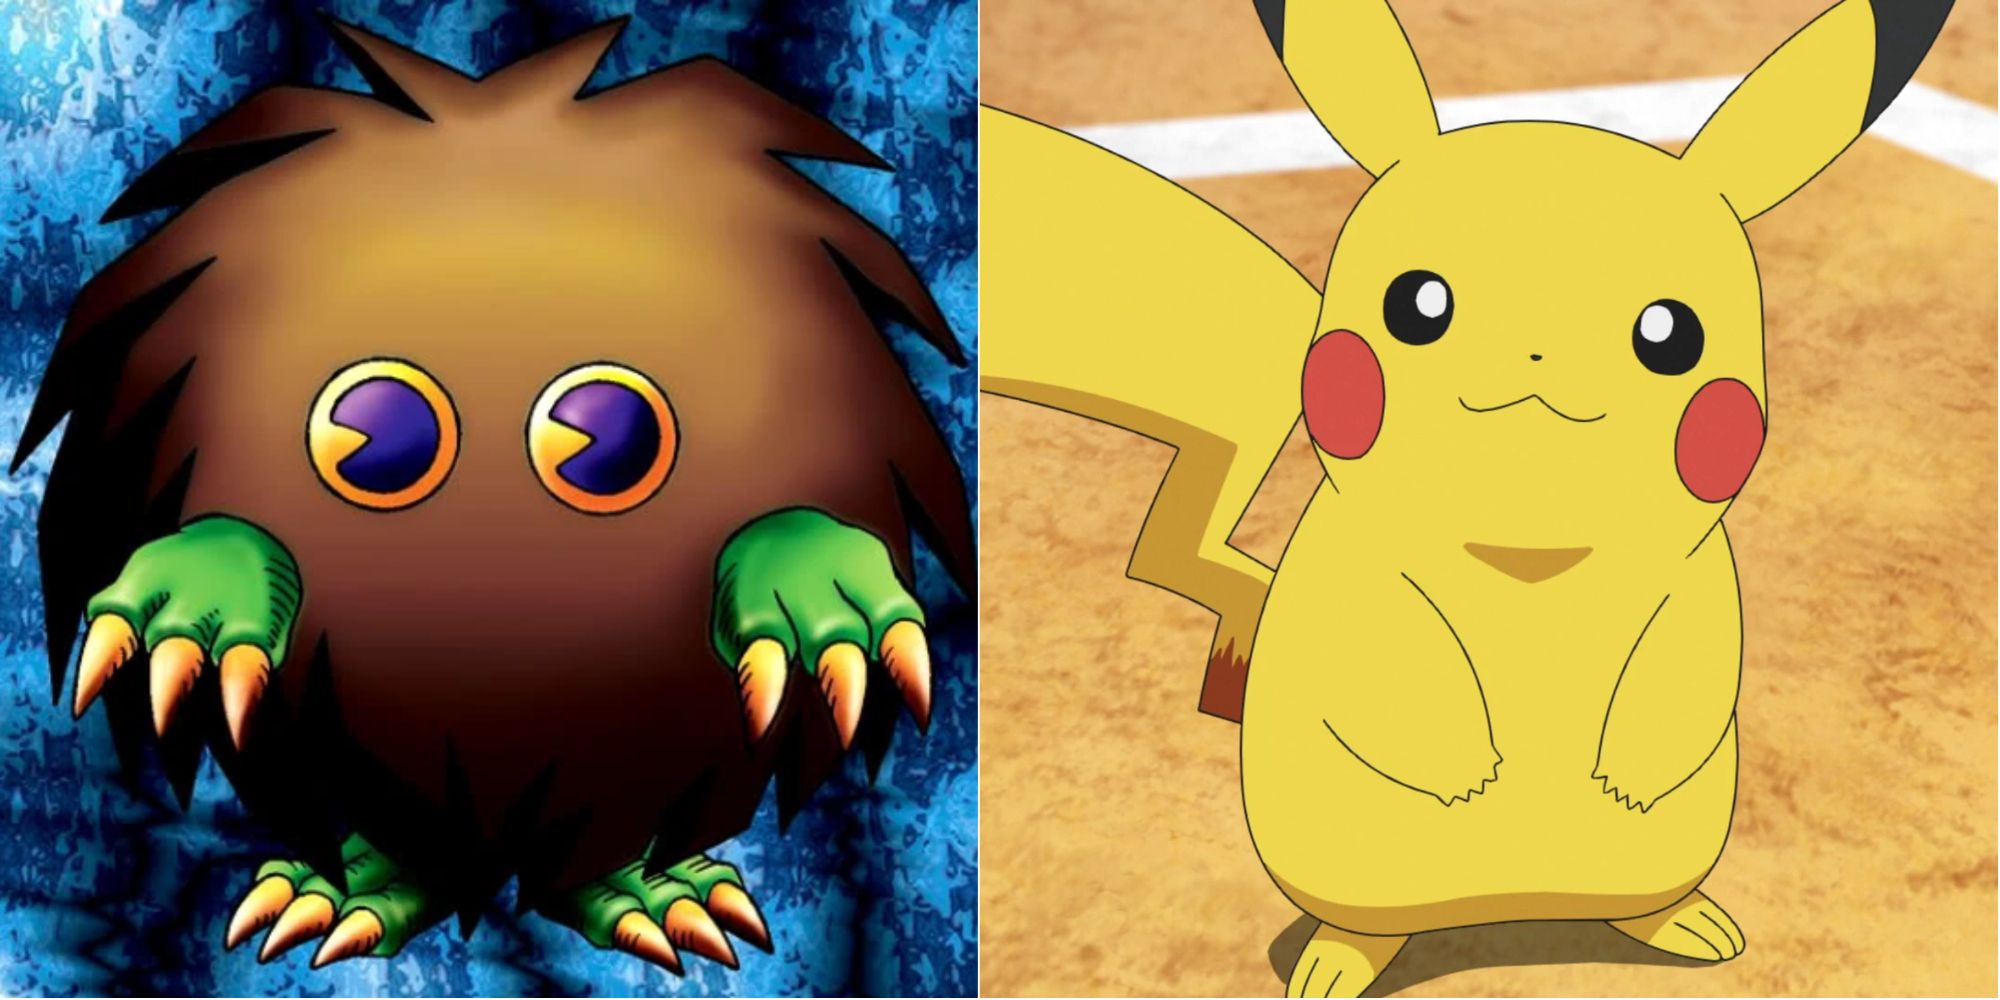 Split image of the Cutest Anime Mascots